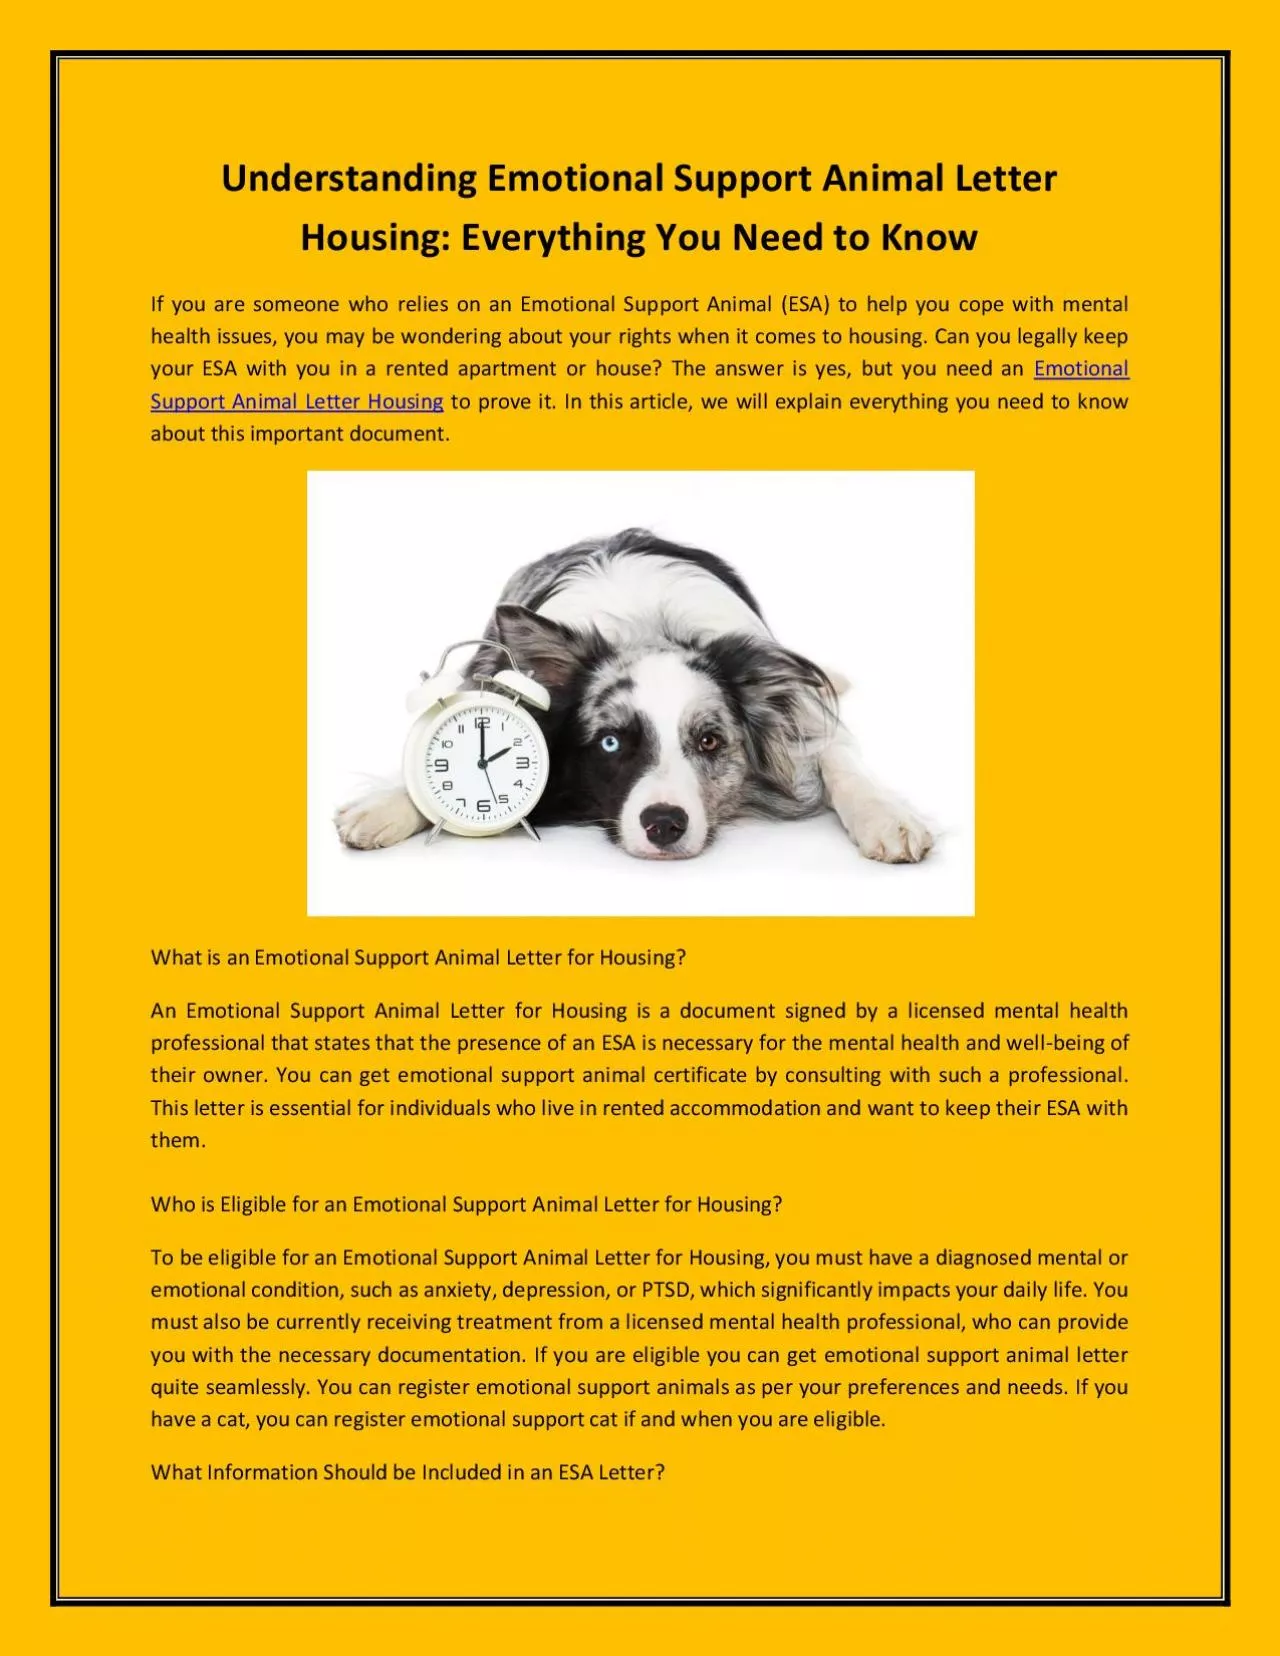 Understanding Emotional Support Animal Letter Housing: Everything You Need to Know